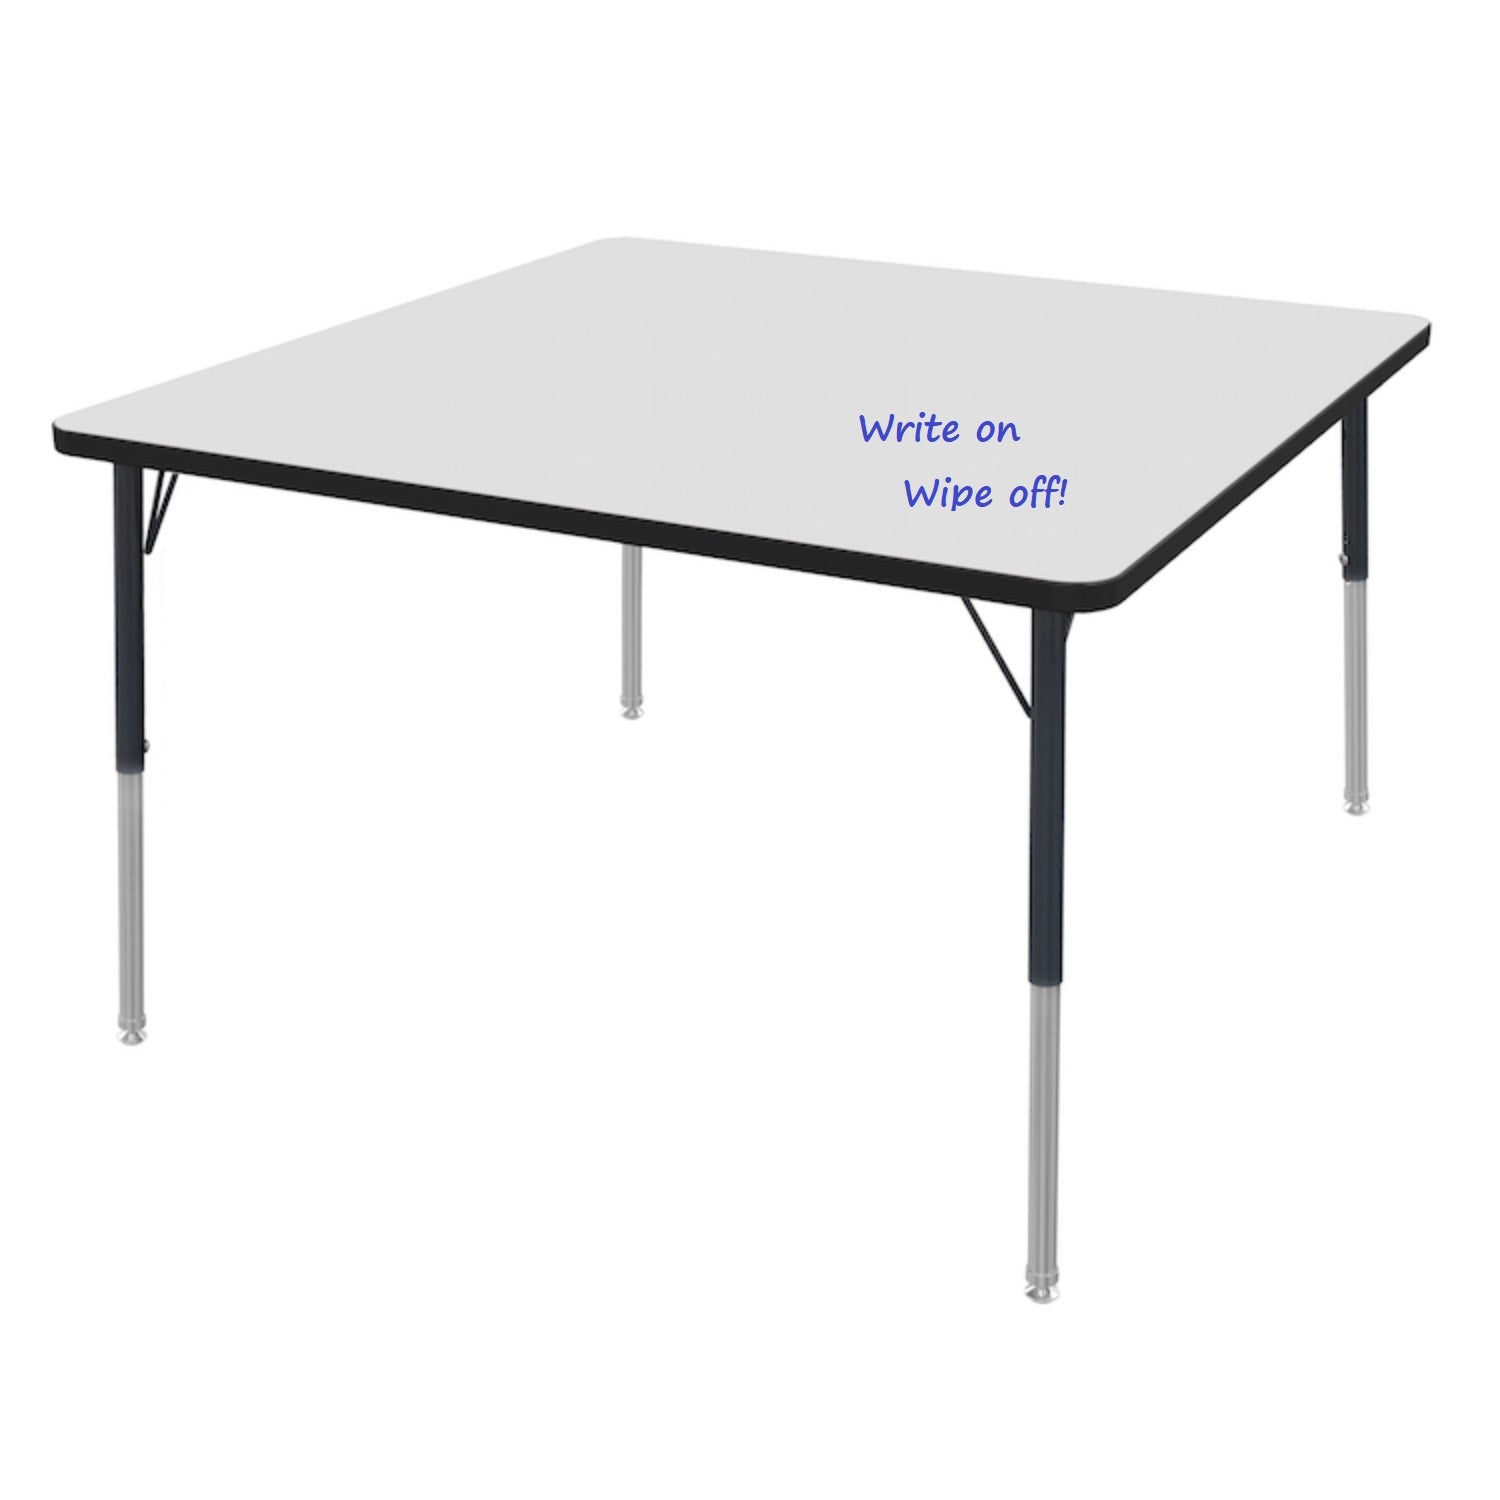 MG Series Adjustable Height Activity Table with White Dry Erase Markerboard Top, 42" x 42" Square